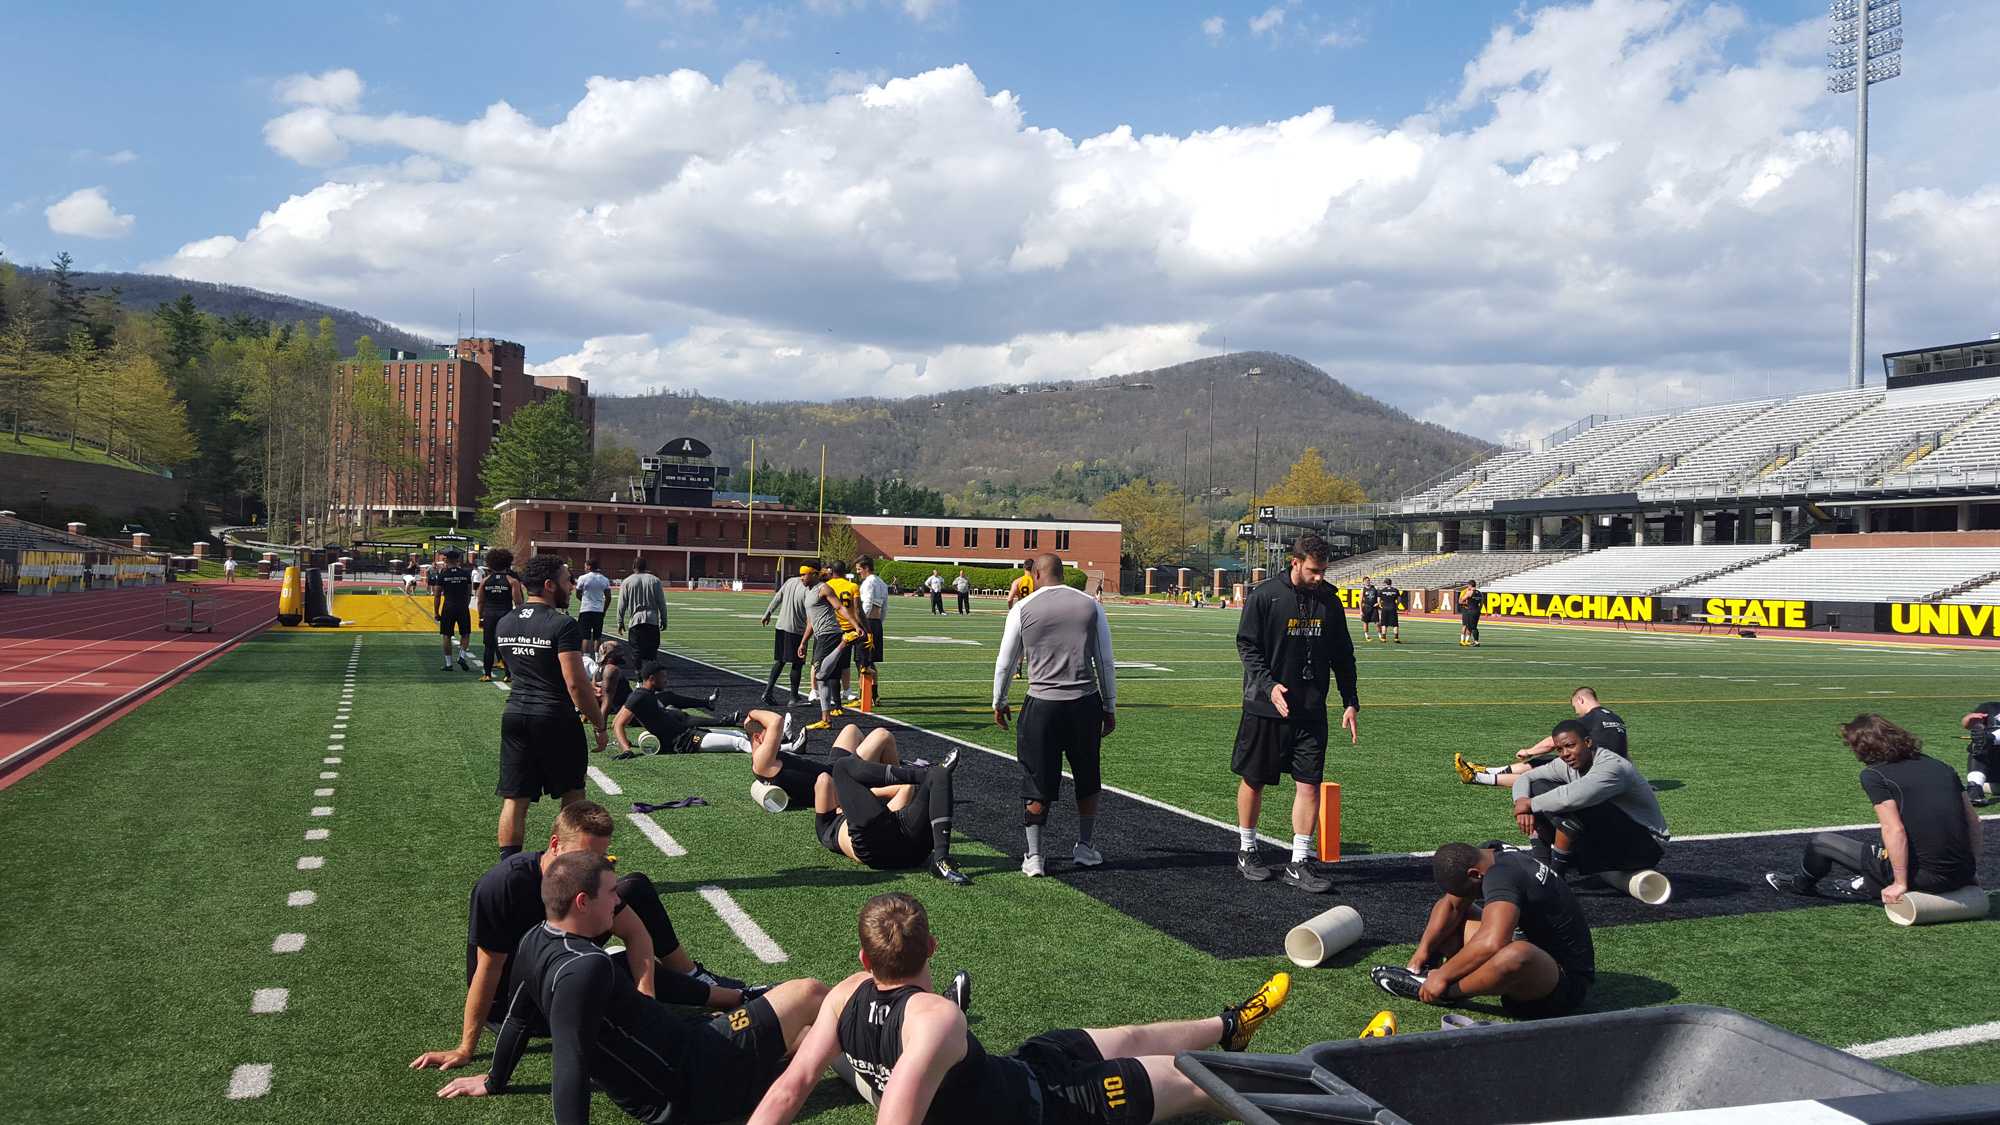 Members of the football team stretching before practice. Photo by Nick Joyner